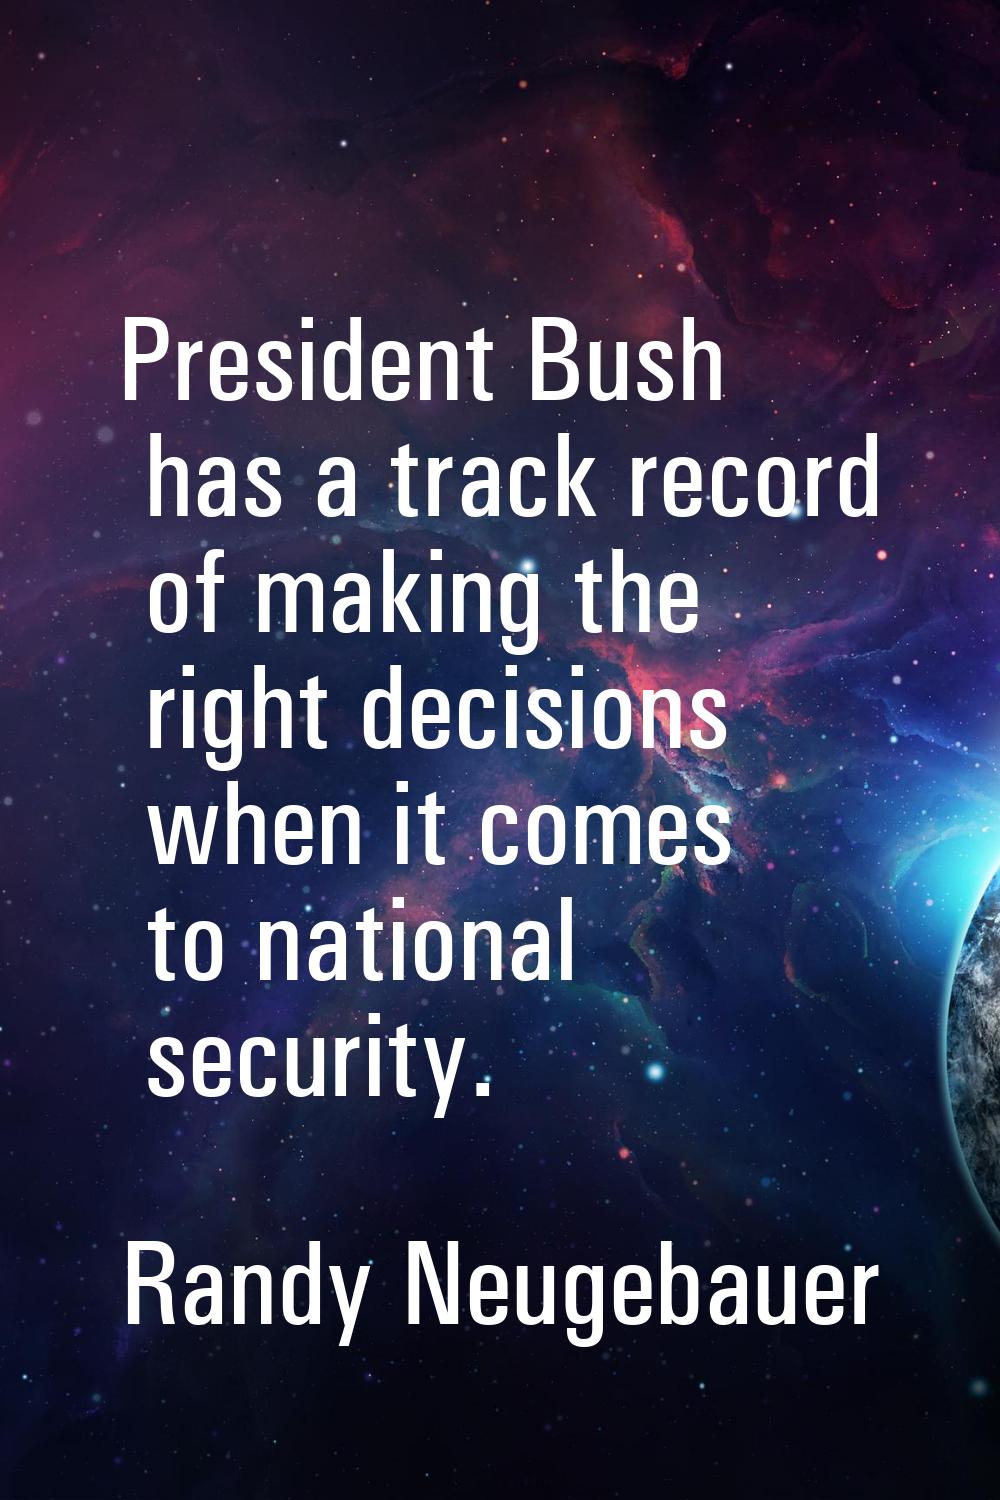 President Bush has a track record of making the right decisions when it comes to national security.